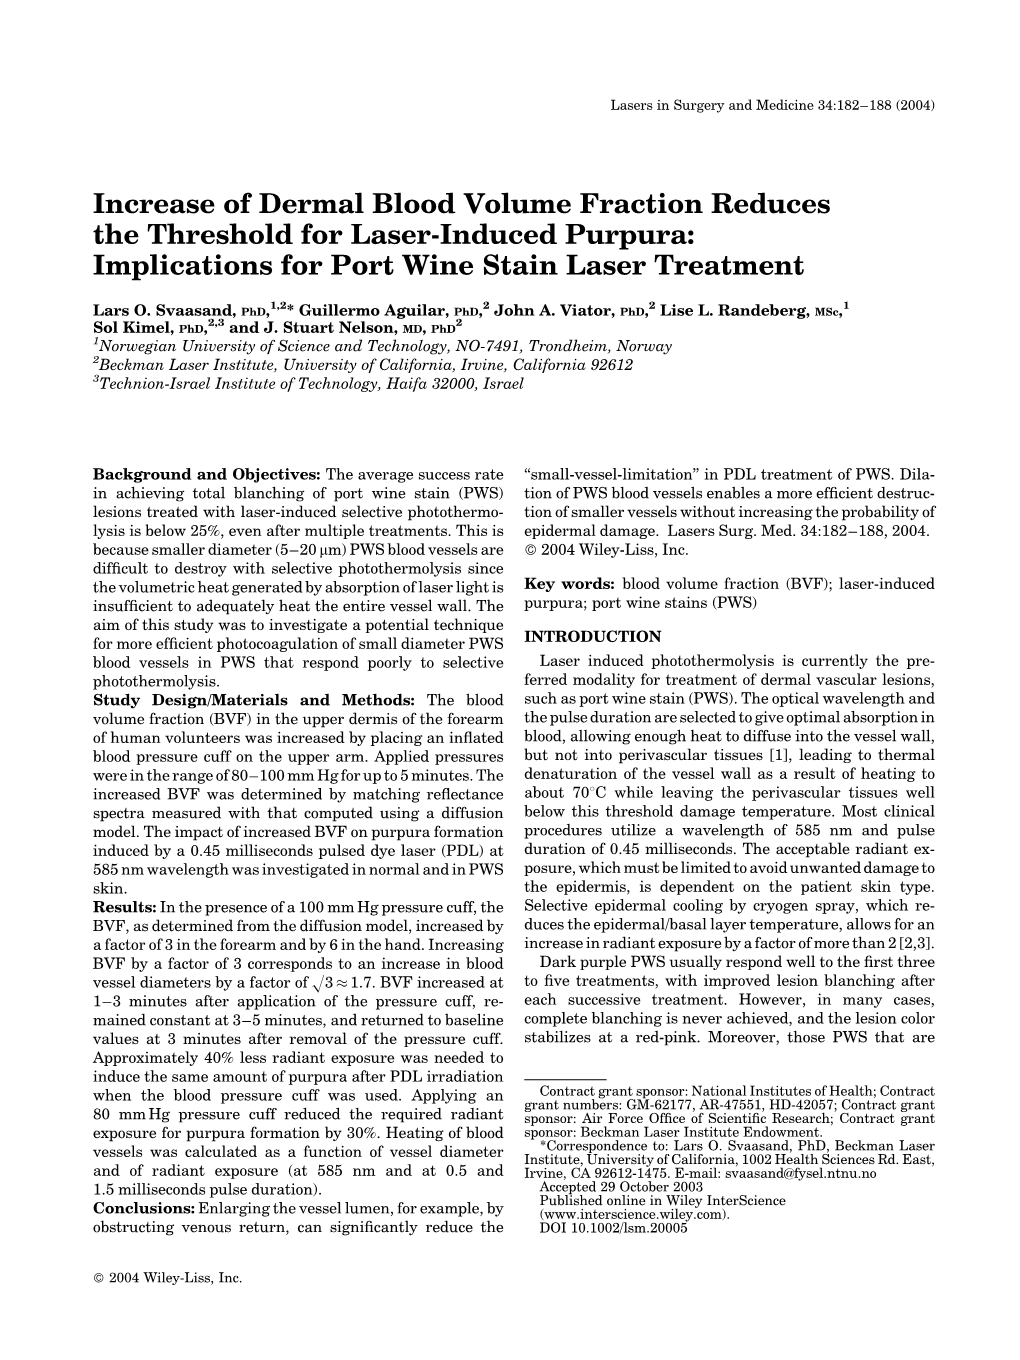 Increase of Dermal Blood Volume Fraction Reduces the Threshold for Laser-Induced Purpura: Implications for Port Wine Stain Laser Treatment